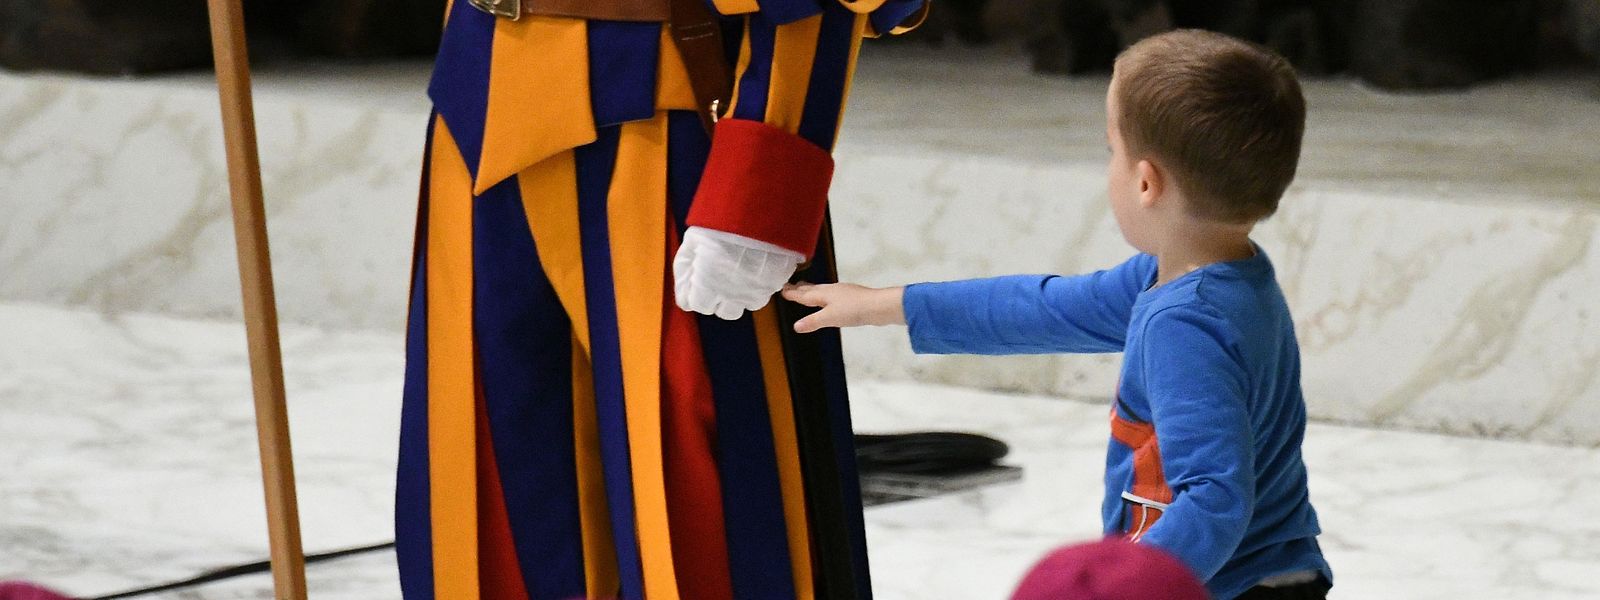 A boy who jumped from the audience onto the stage, interacts with a Swiss Guard as Cardinals look on during the weekly general audience on November 28, 2018 in Paul VI hall at the Vatican. (Photo by Vincenzo PINTO / AFP)